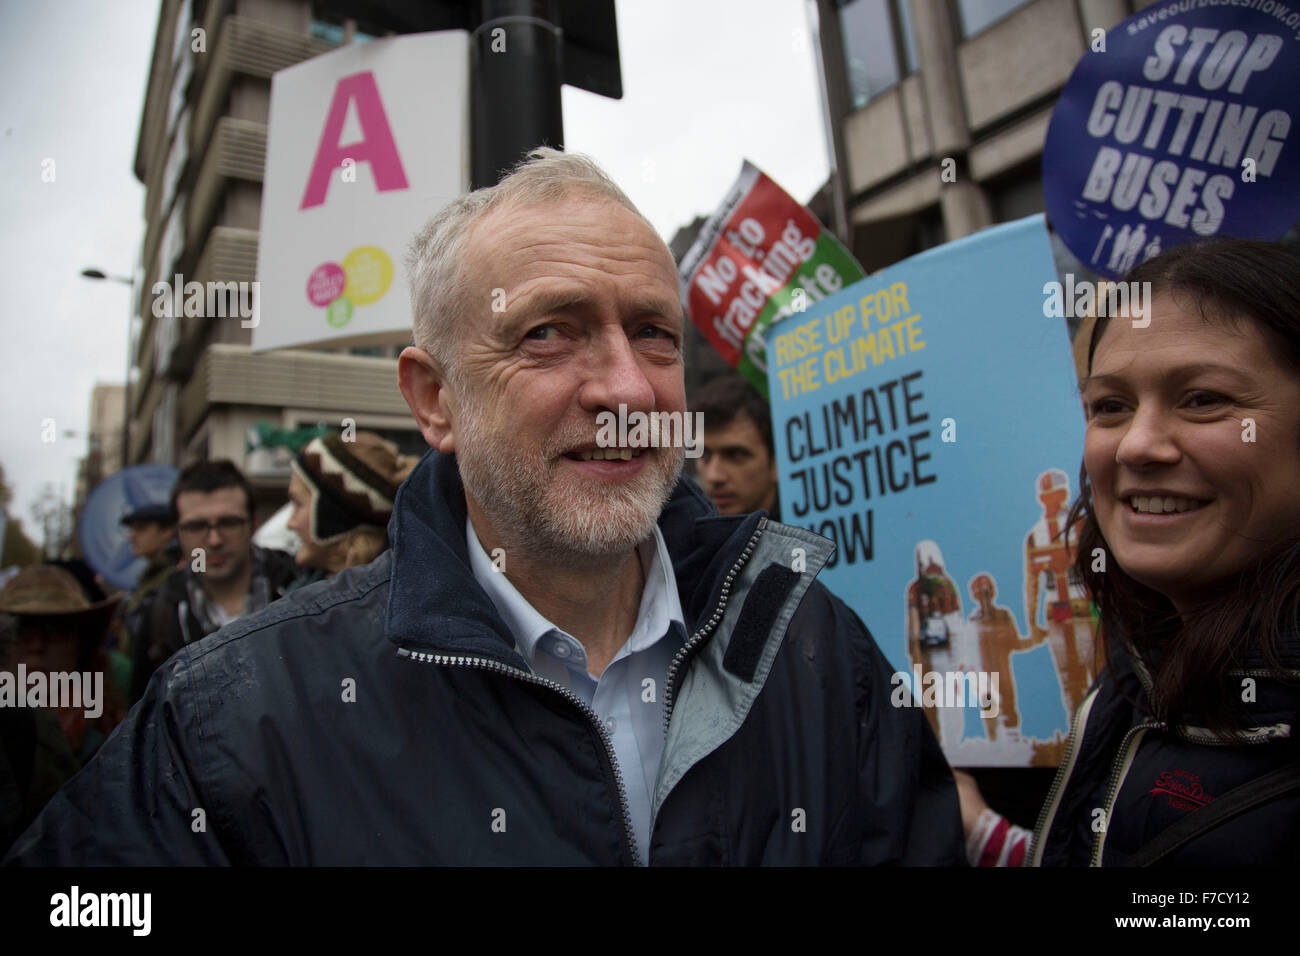 London, UK. Sunday 29th November 2015. Labour Party Leader Jeremy Corbyn attends the Peoples March for Climate Justice and Jobs demonstration. Demonstrators gathered in their tens of thousands to protest against all kinds of environmental issues such as fracking, clean air, and alternative energies, prior to Major climate change talks. Stock Photo